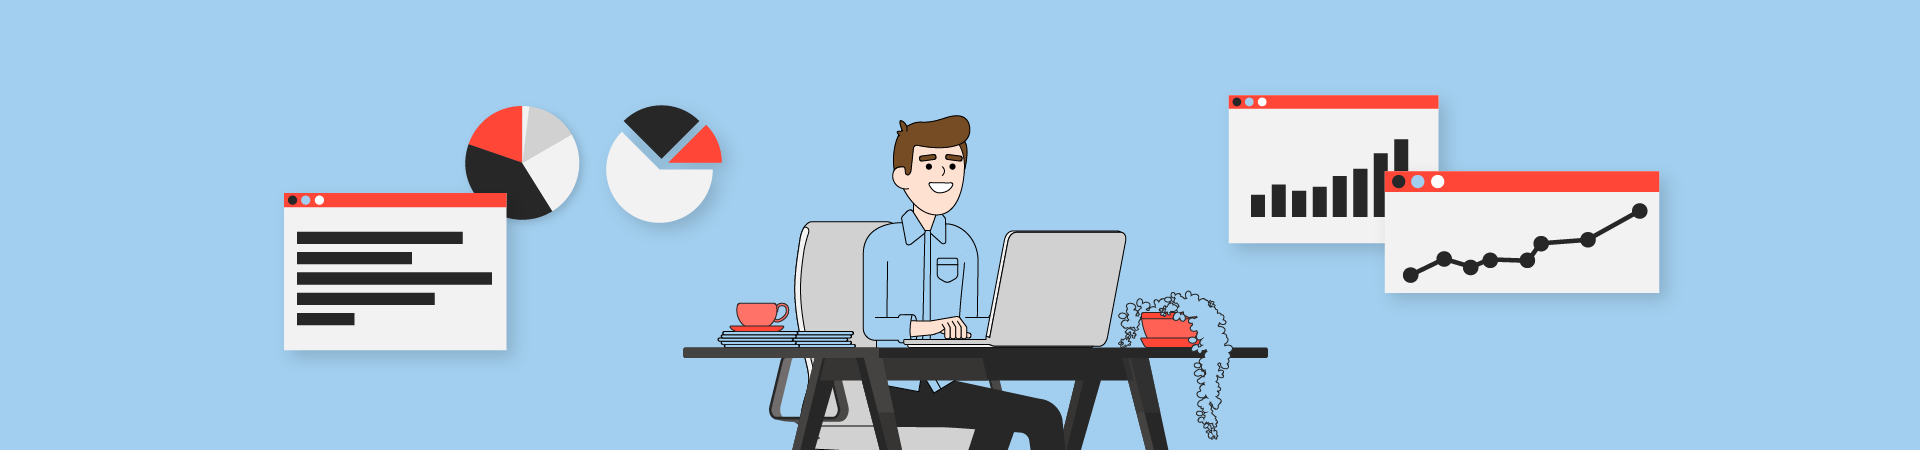 illustration of man sitting at desk surrounded by graphs